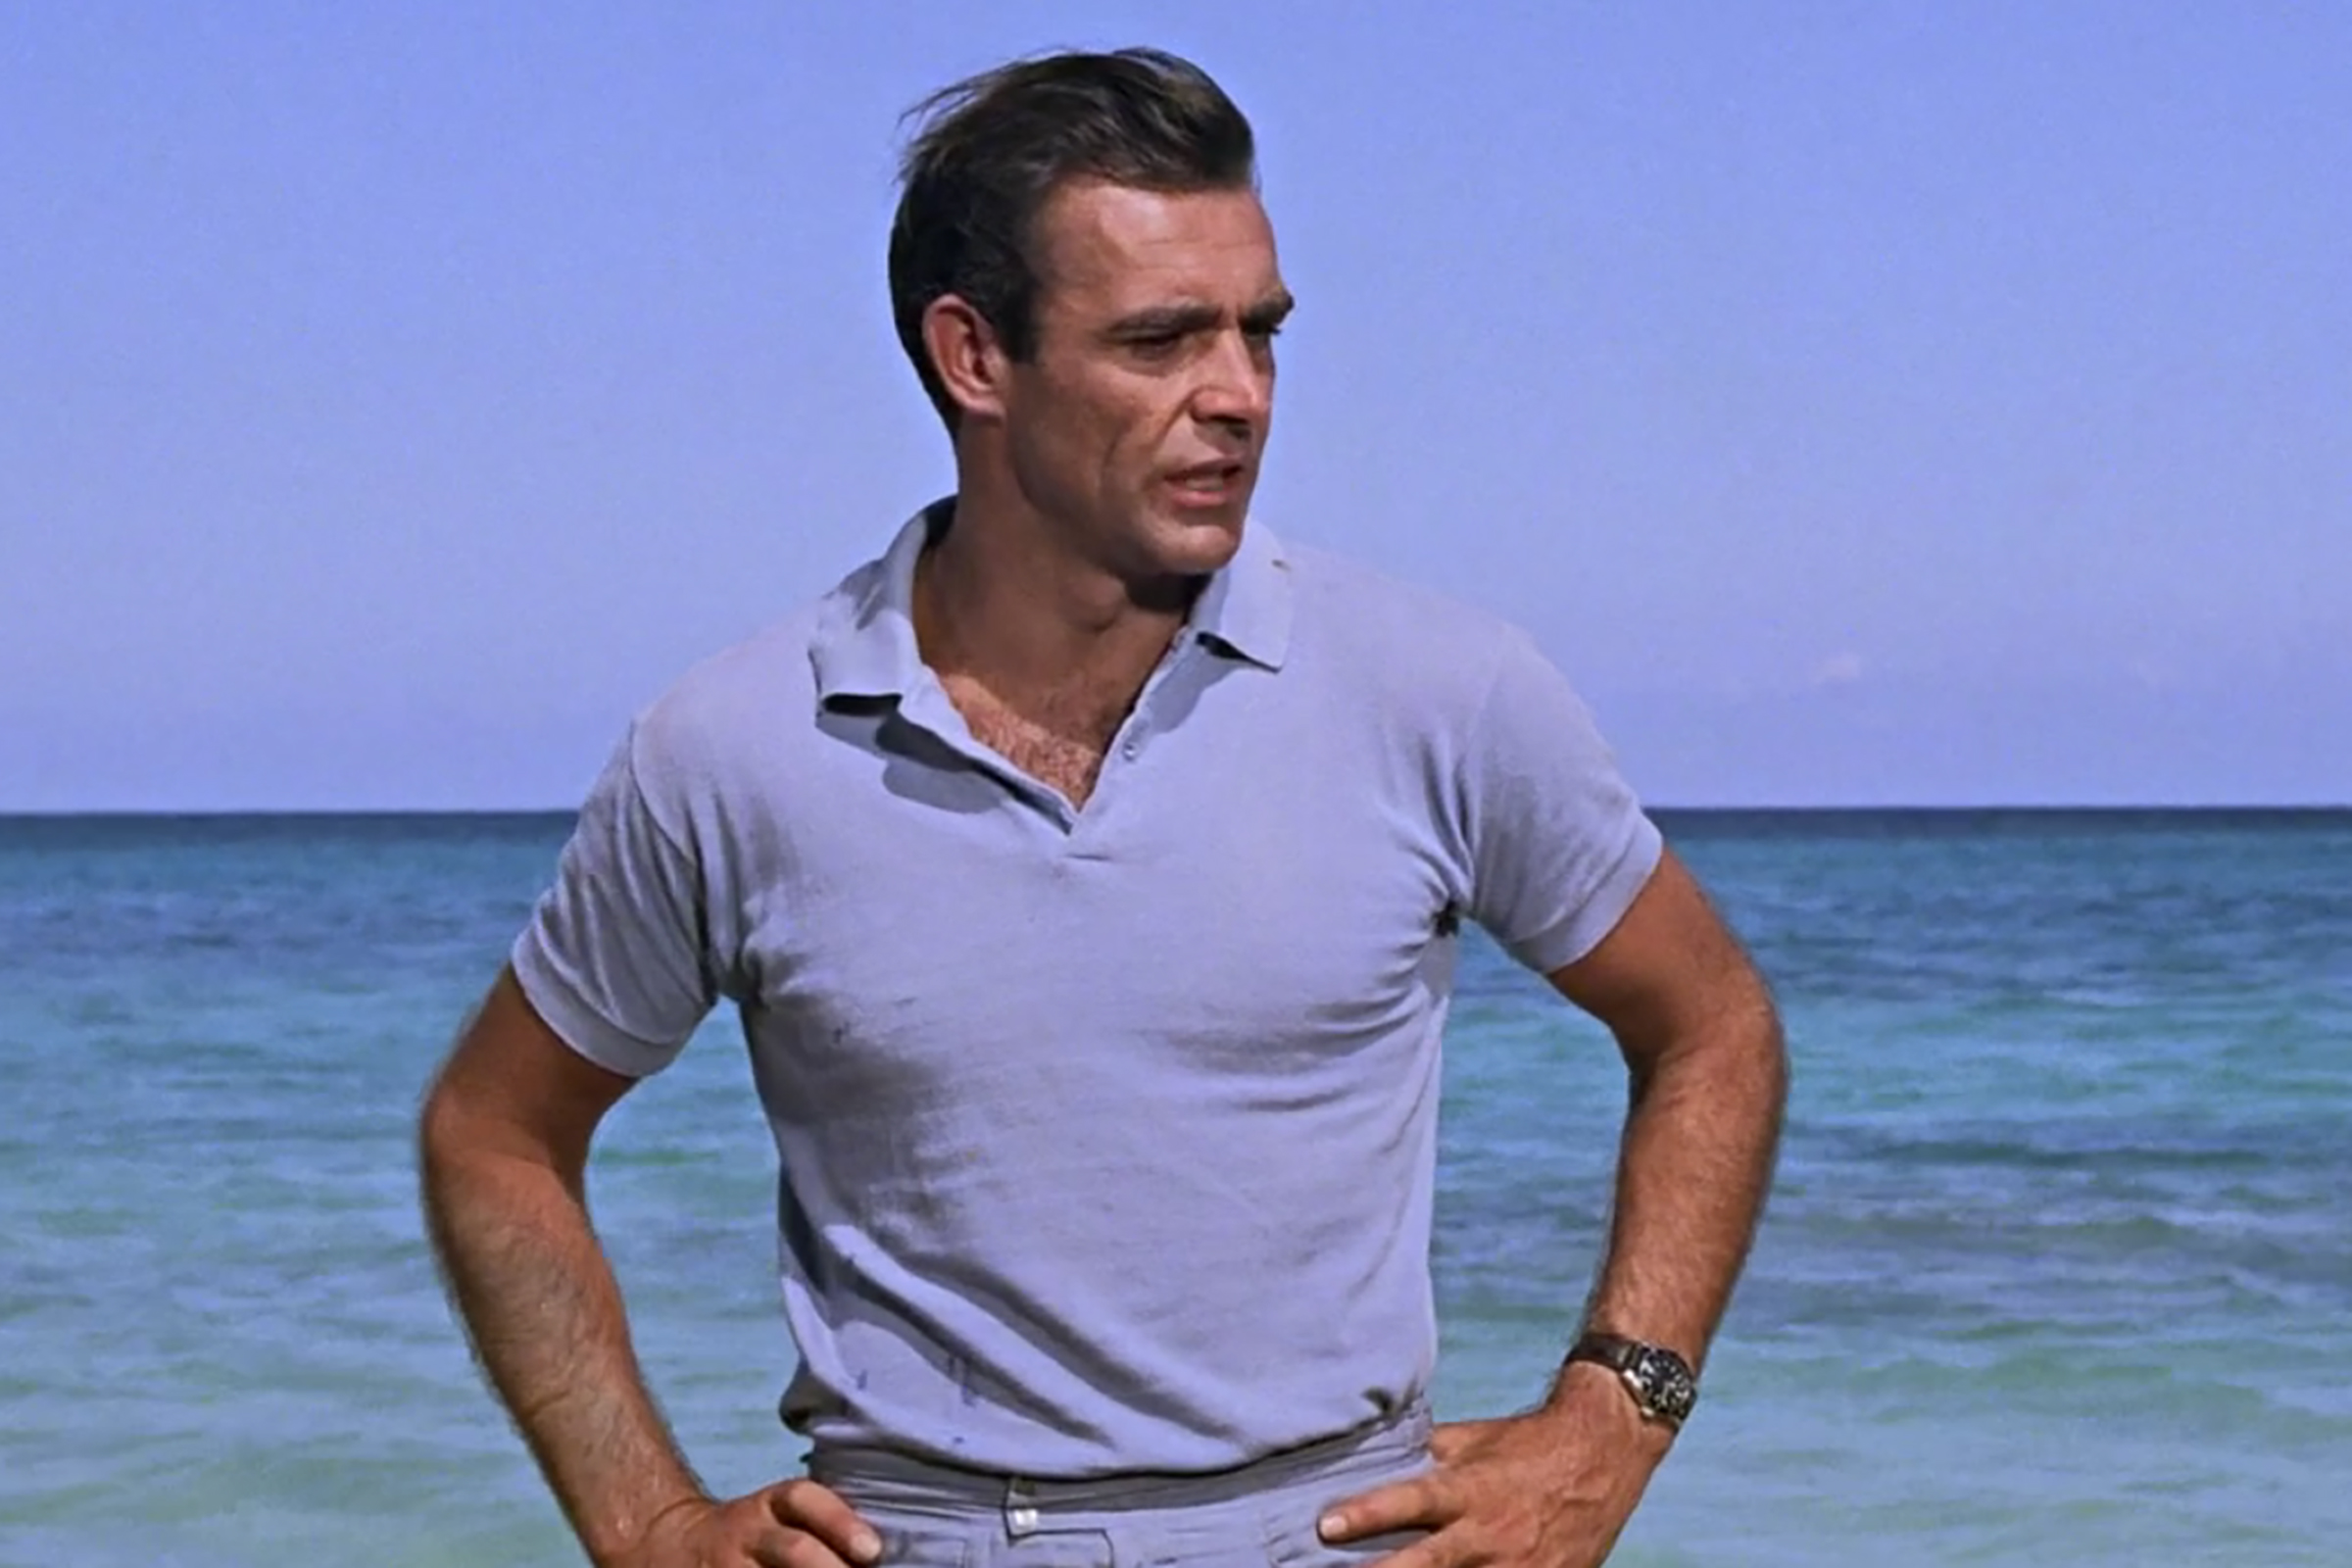 The Best Outfit From Every Single James Bond Movie, Ranked - InsideHook